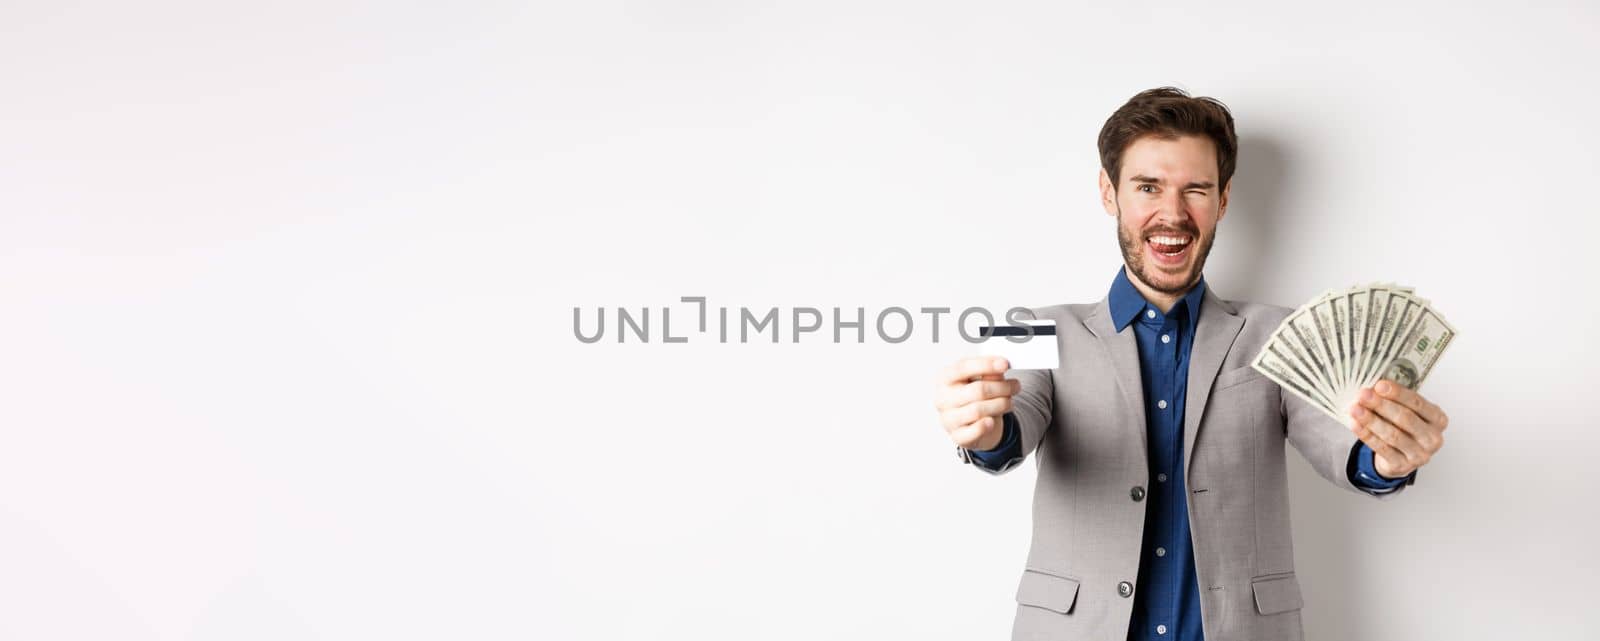 Happy successful businessman in suit showing money and credit card, smiling at camera, white background.